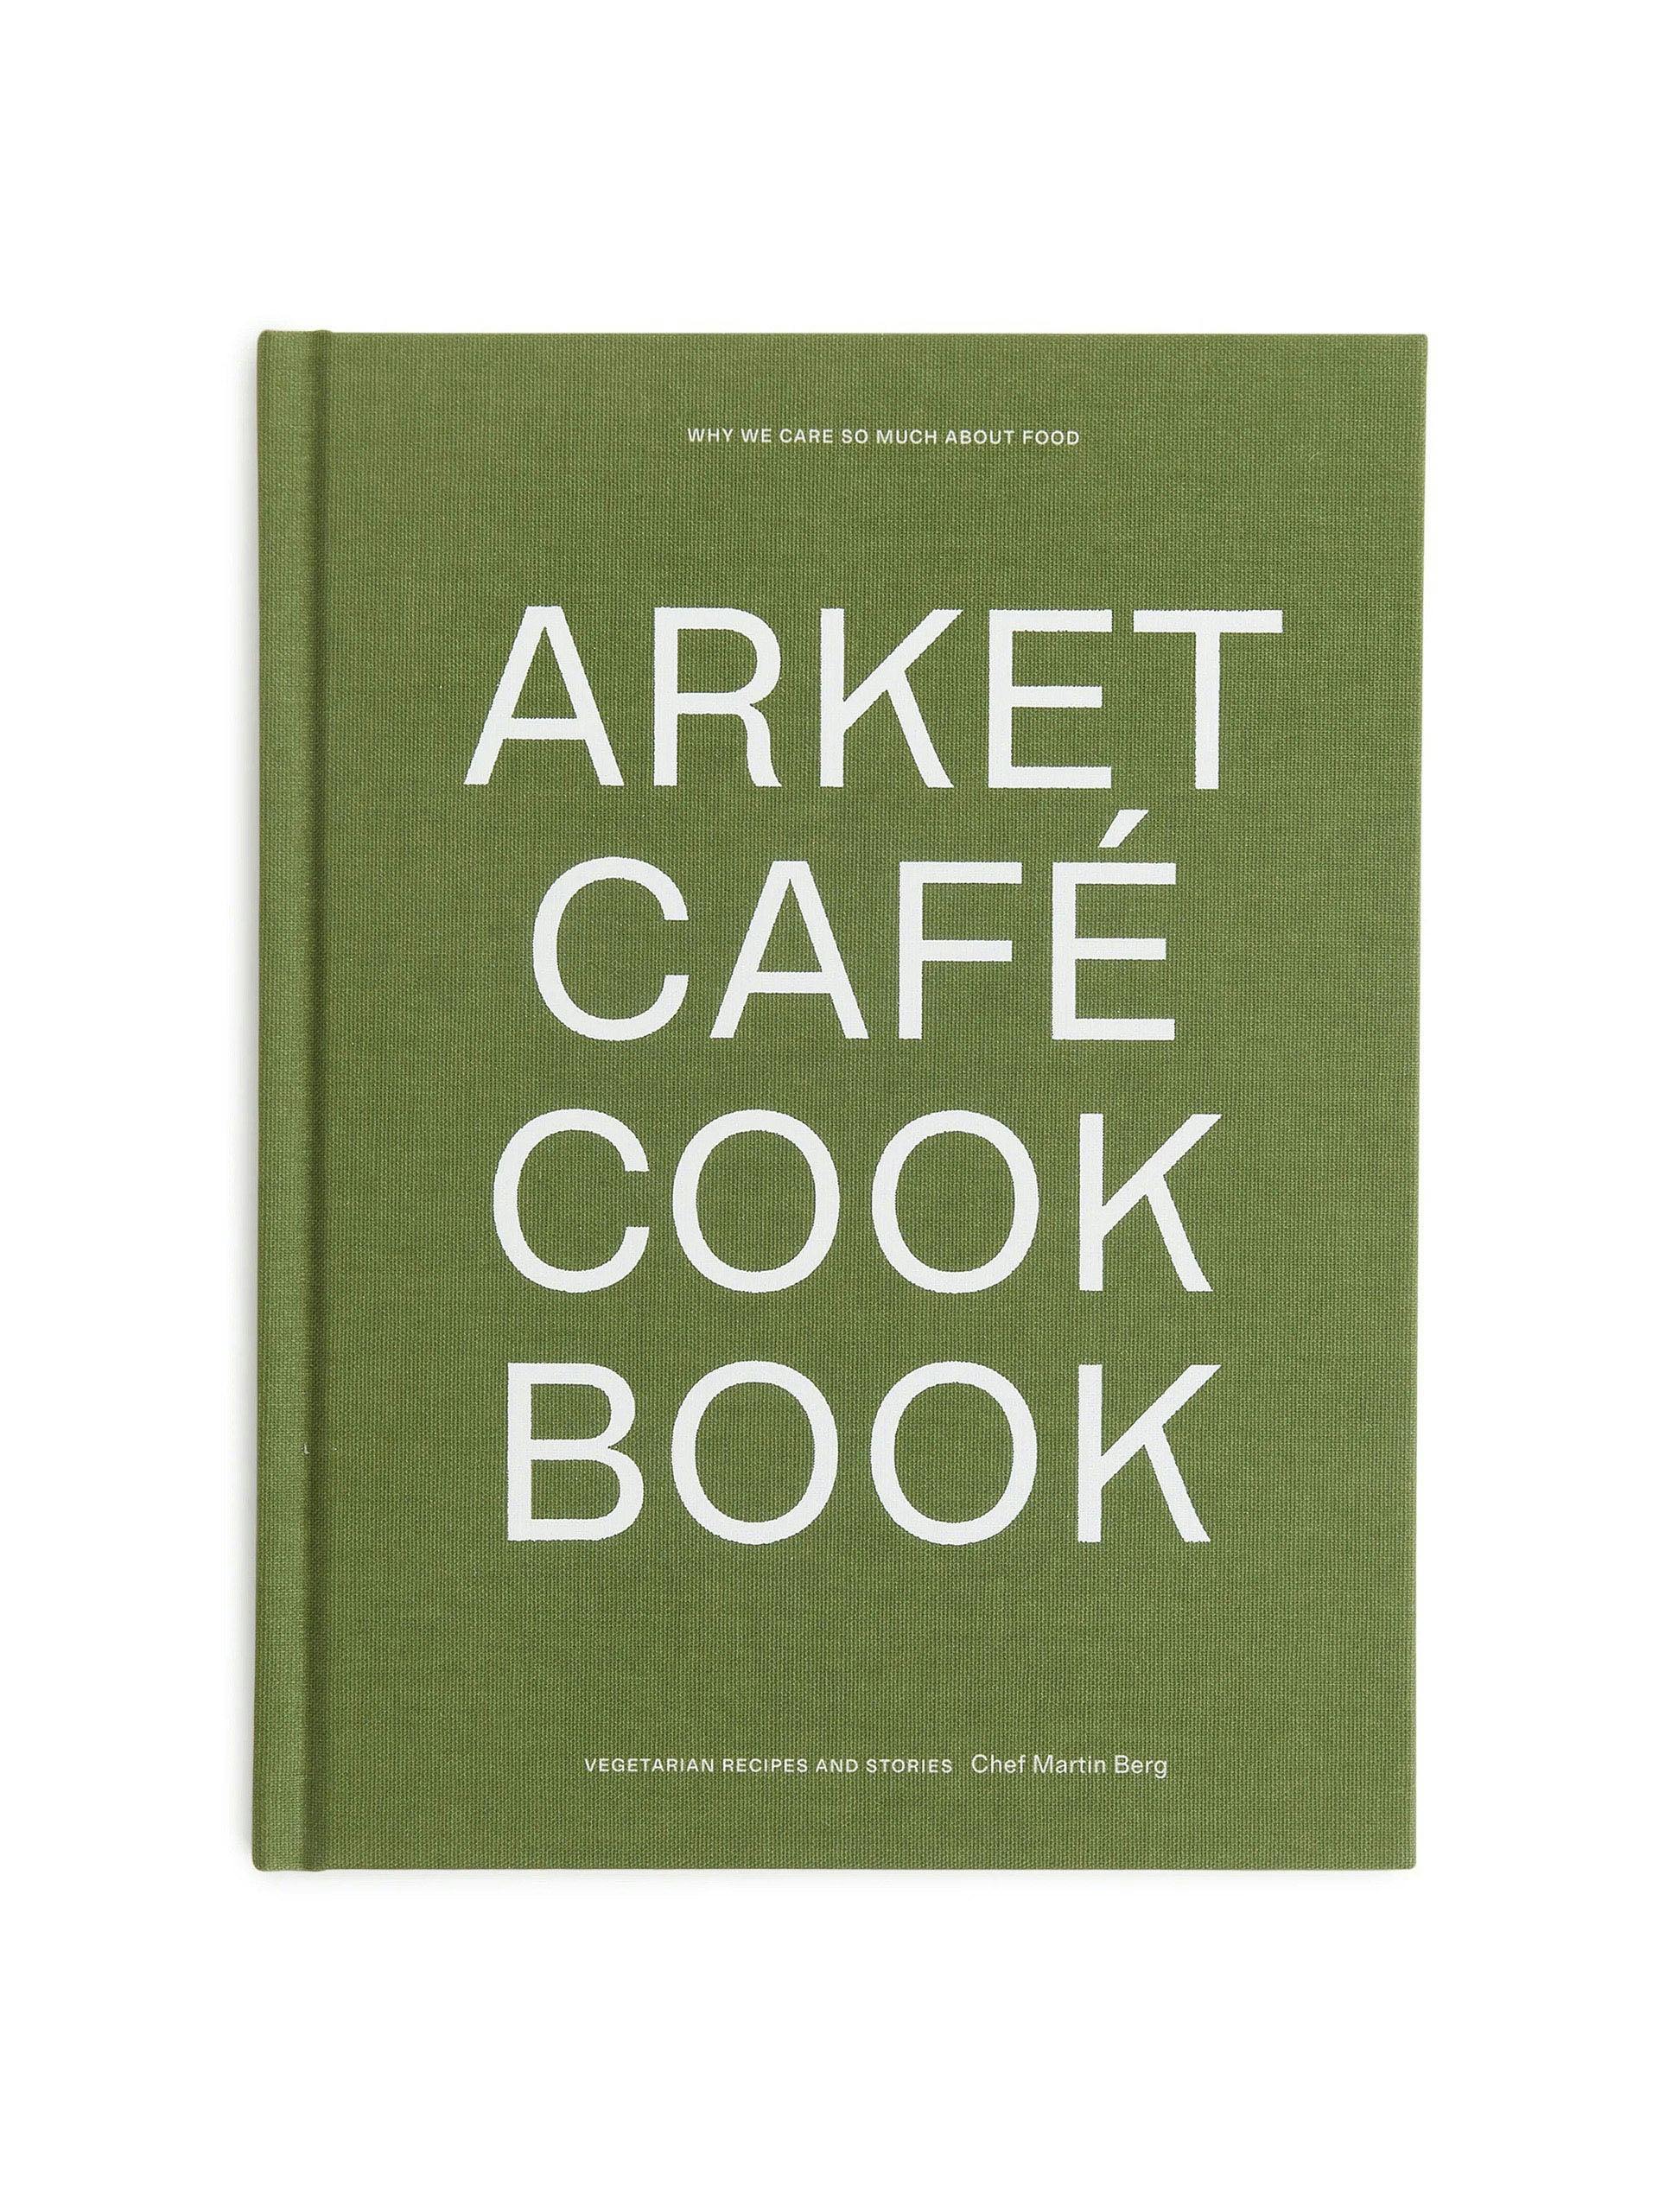 The Cafe Cookbook by Martin Berg